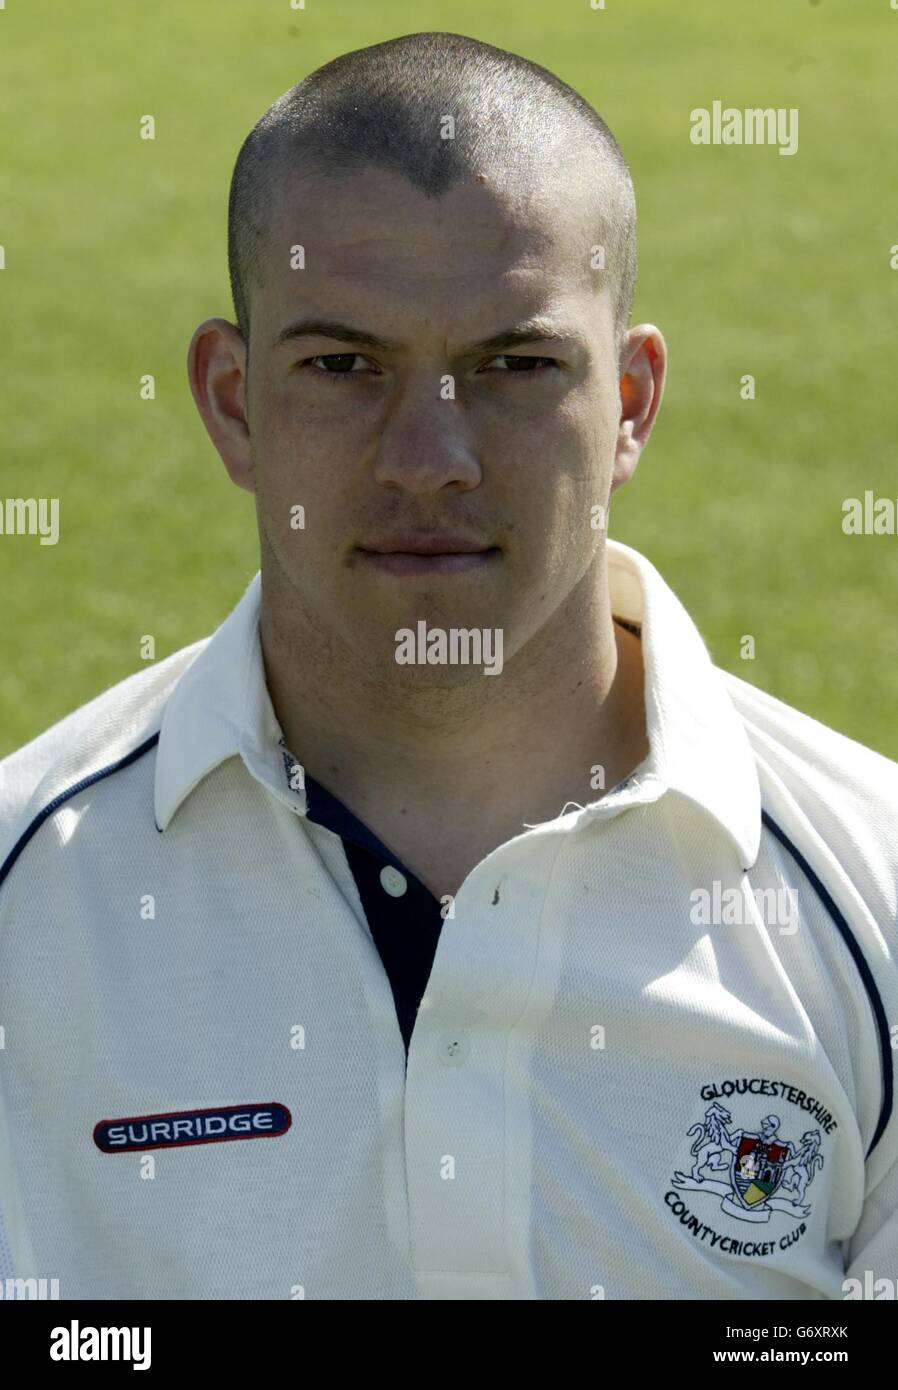 Steve Adshead of Gloucestershire County Cricket Club during a photocall at Bristol, ahead of the new 2004 season. Stock Photo